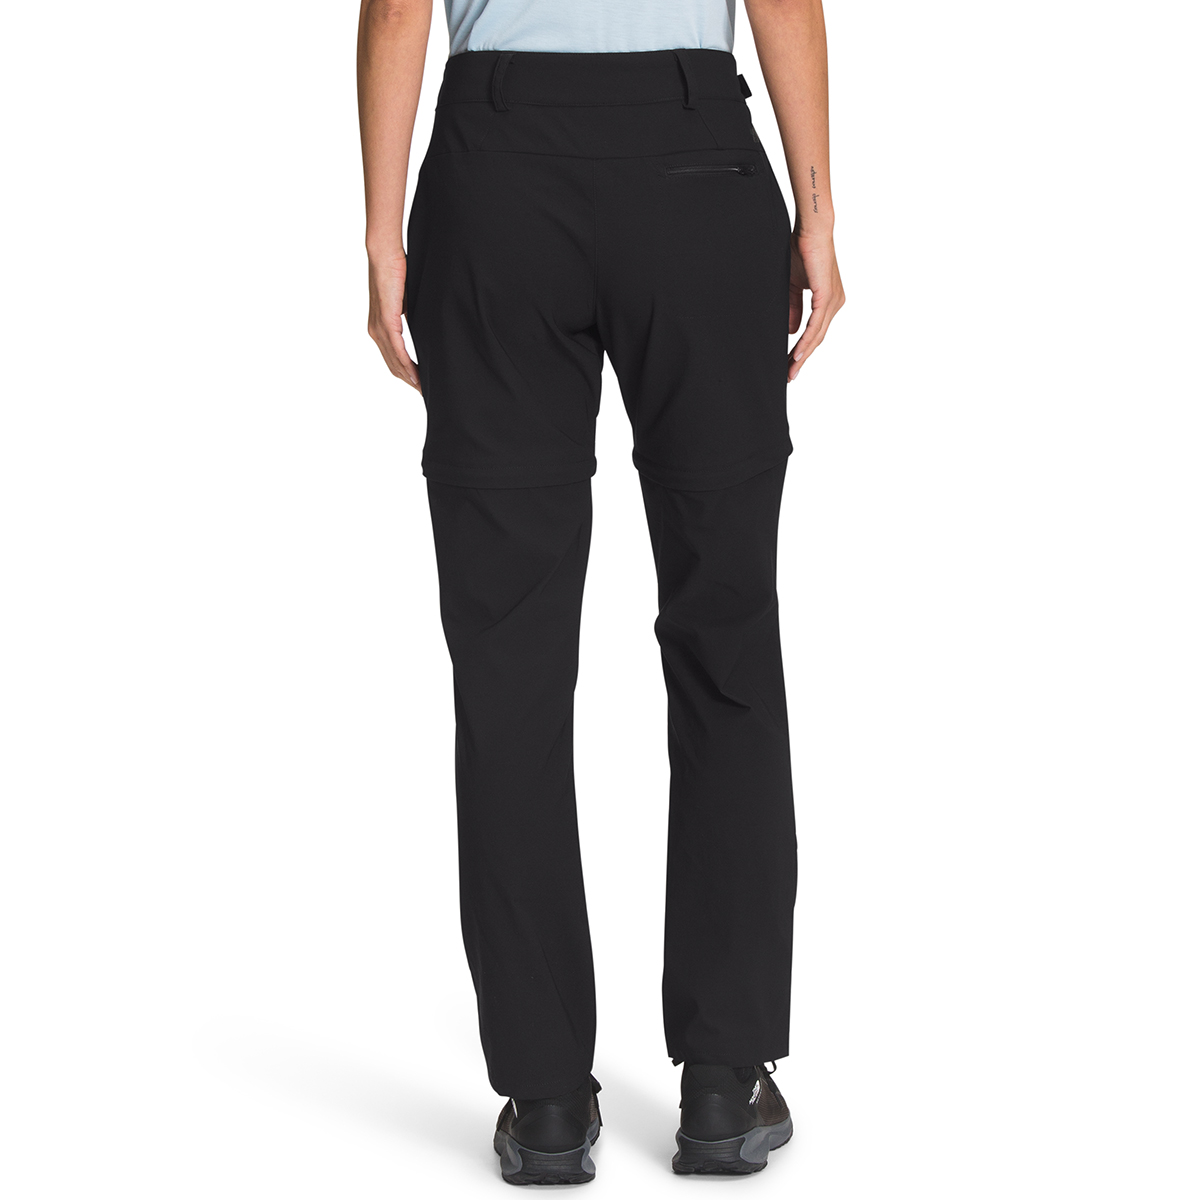 THE NORTH FACE Women's Paramount Mid-Rise Pant - Eastern Mountain Sports